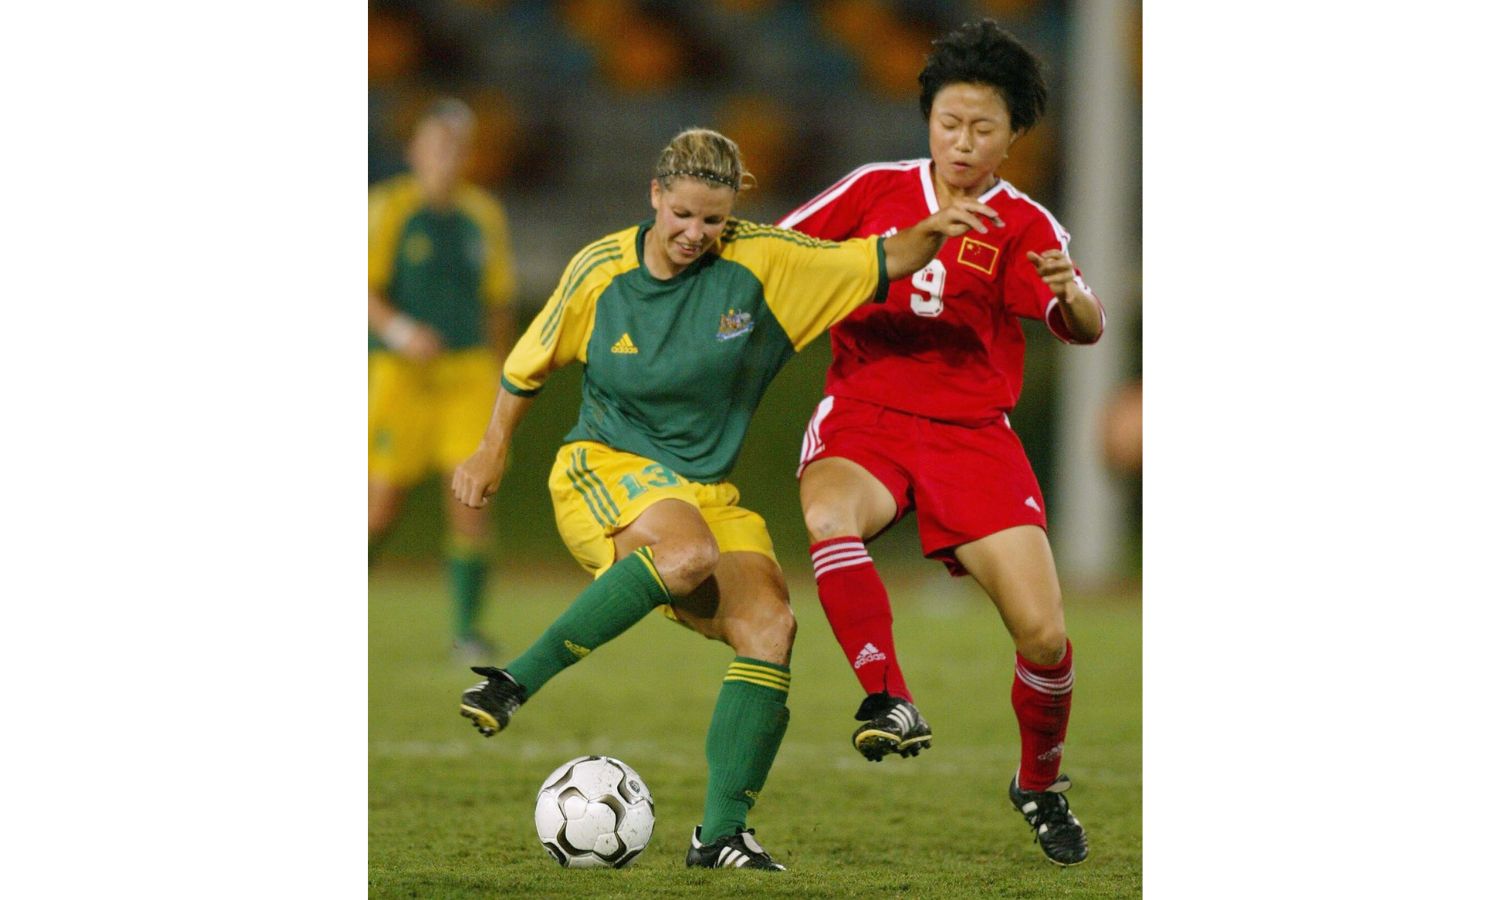 An image showing Amy Taylor (Duggan) playing for the Matildas